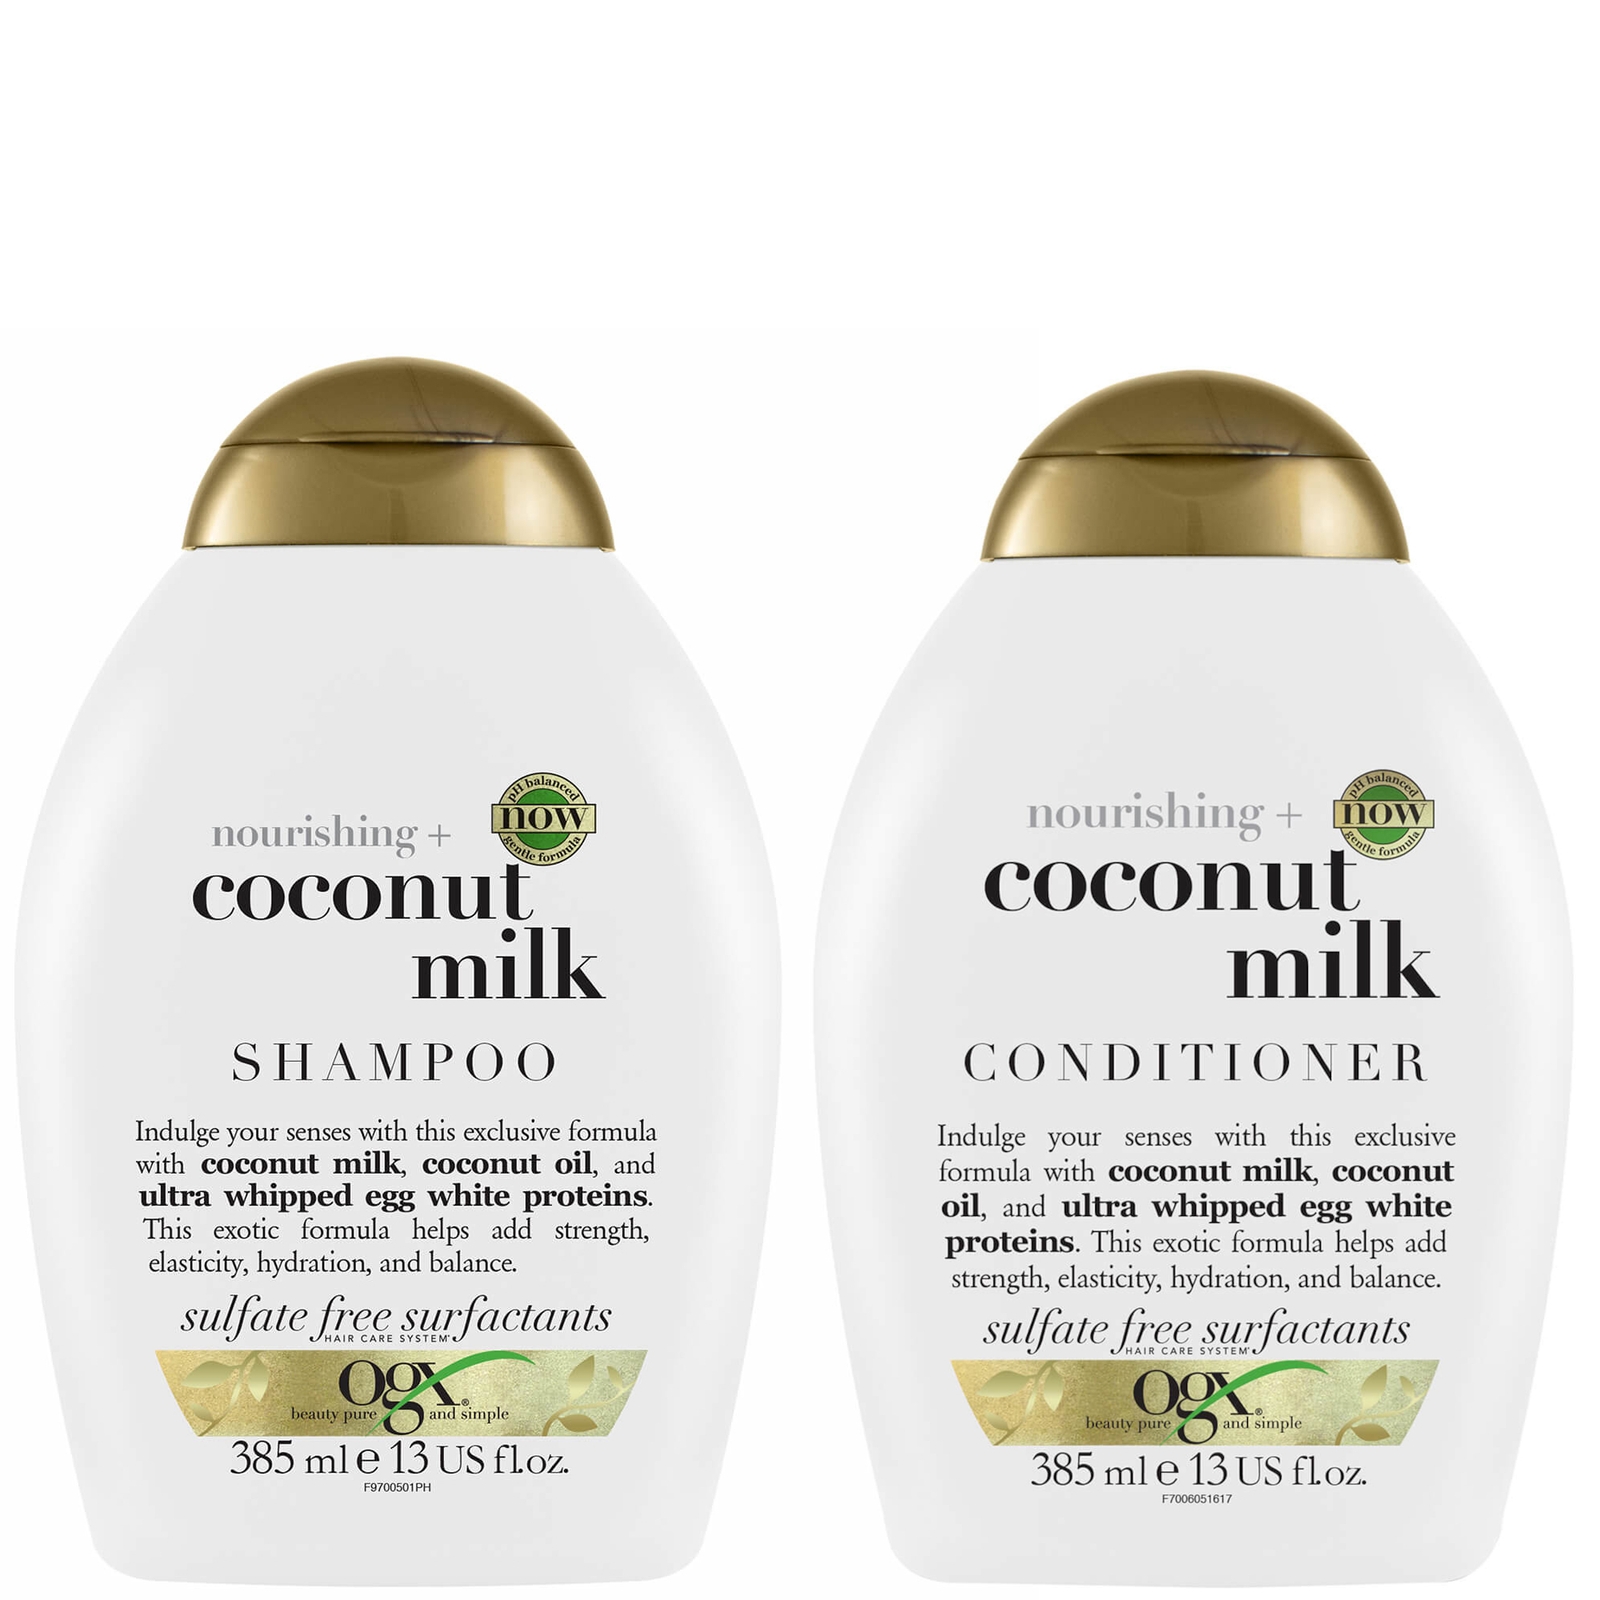 Shop Ogx Nourishing+ Coconut Milk Shampoo And Conditioner Bundle For Strong Hair